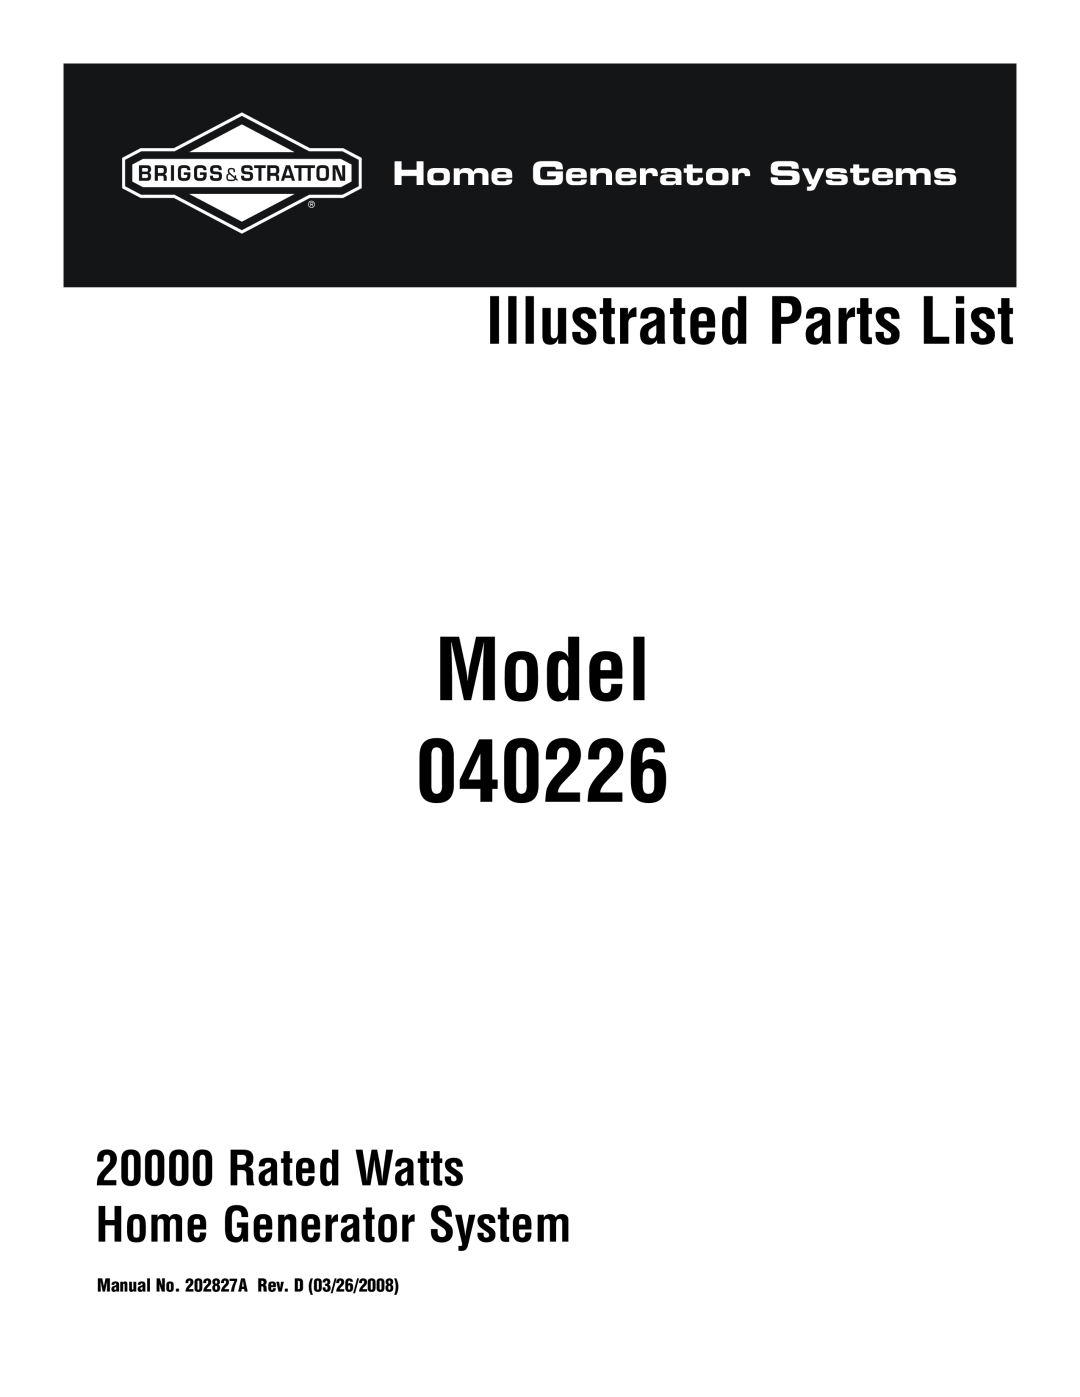 Briggs & Stratton manual Model 040226, Illustrated Parts List, Rated Watts Home Generator System 